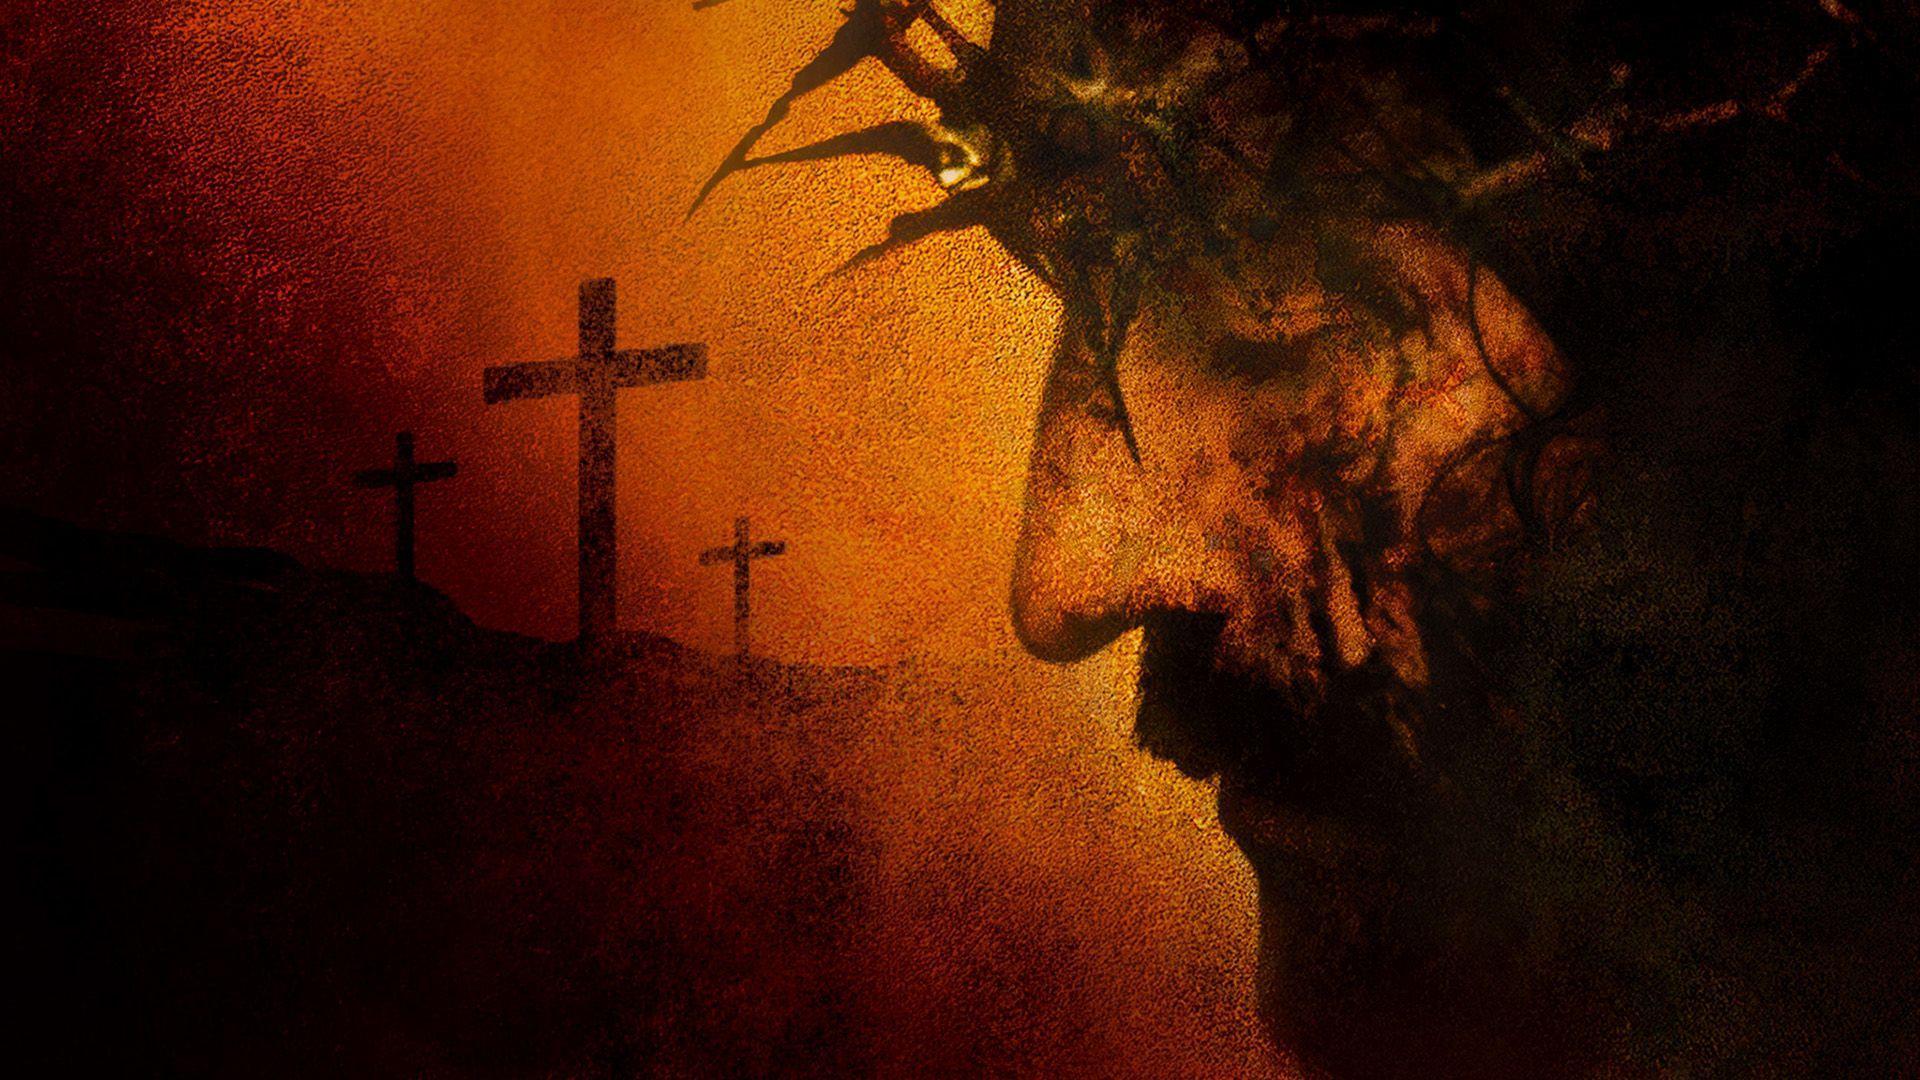 Passion of christ 1080P 2K 4K 5K HD wallpapers free download  Wallpaper  Flare